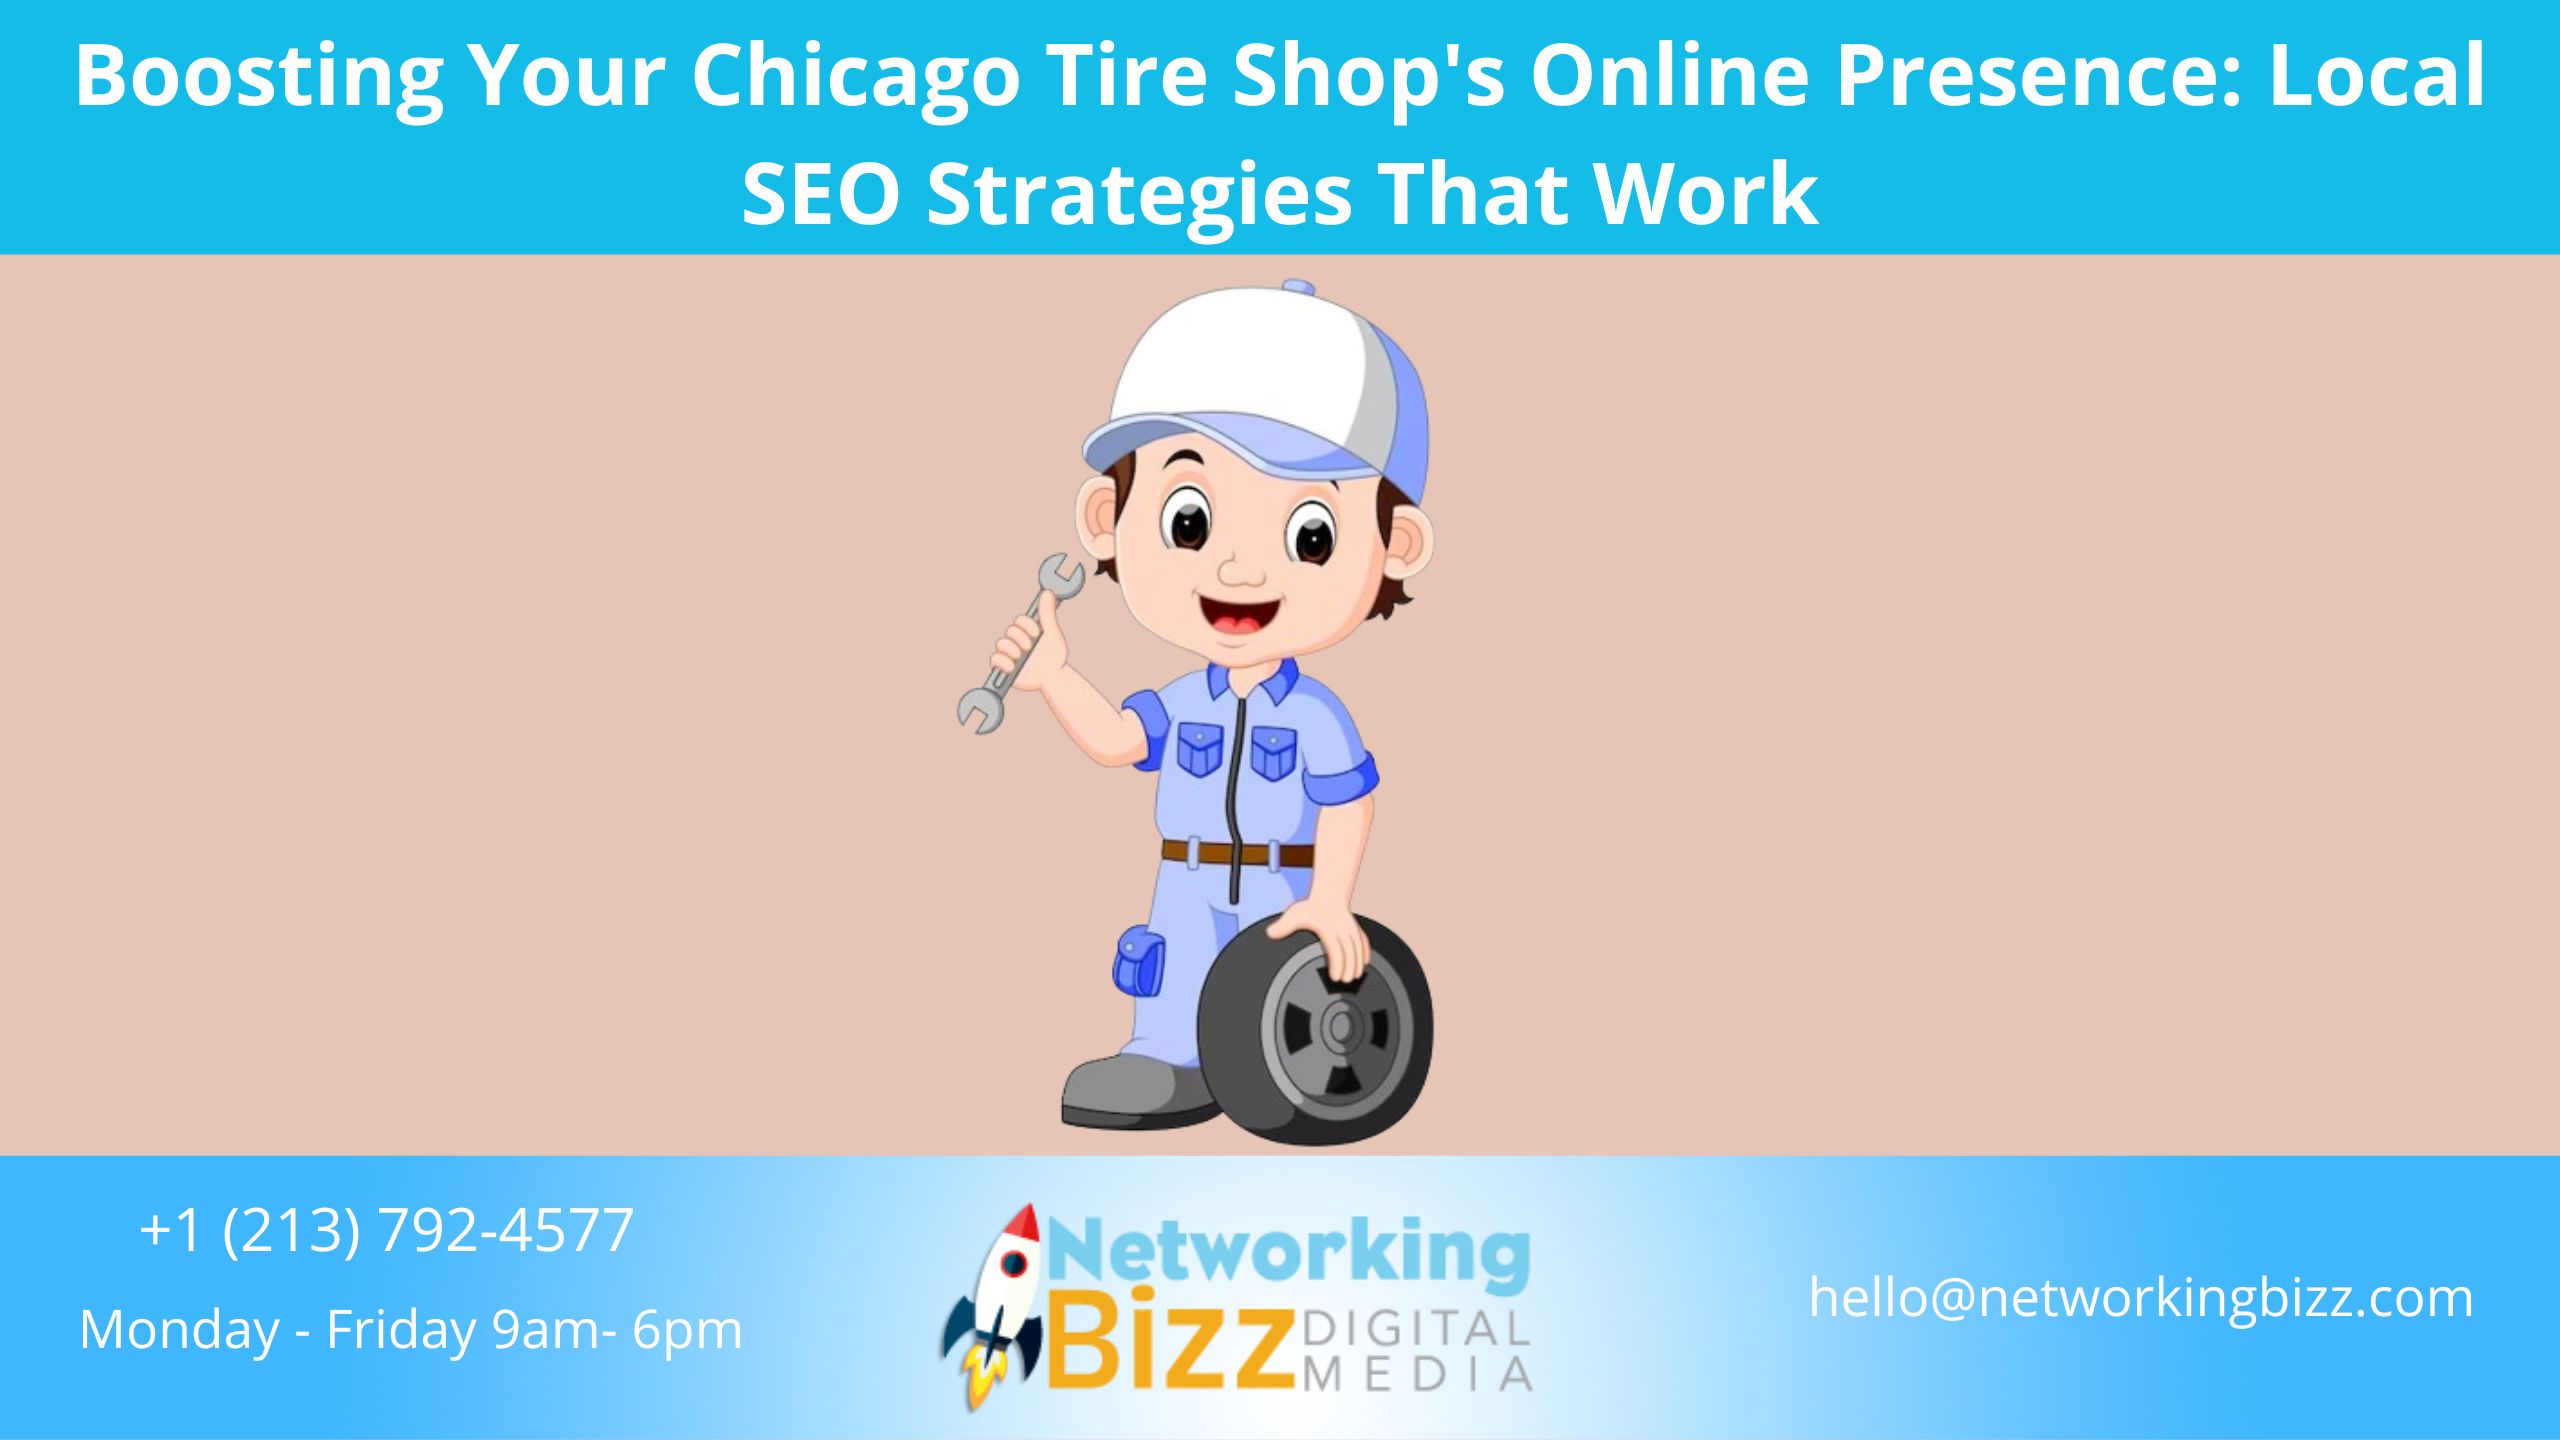 Boosting Your Chicago Tire Shop’s Online Presence: Local SEO Strategies That Work